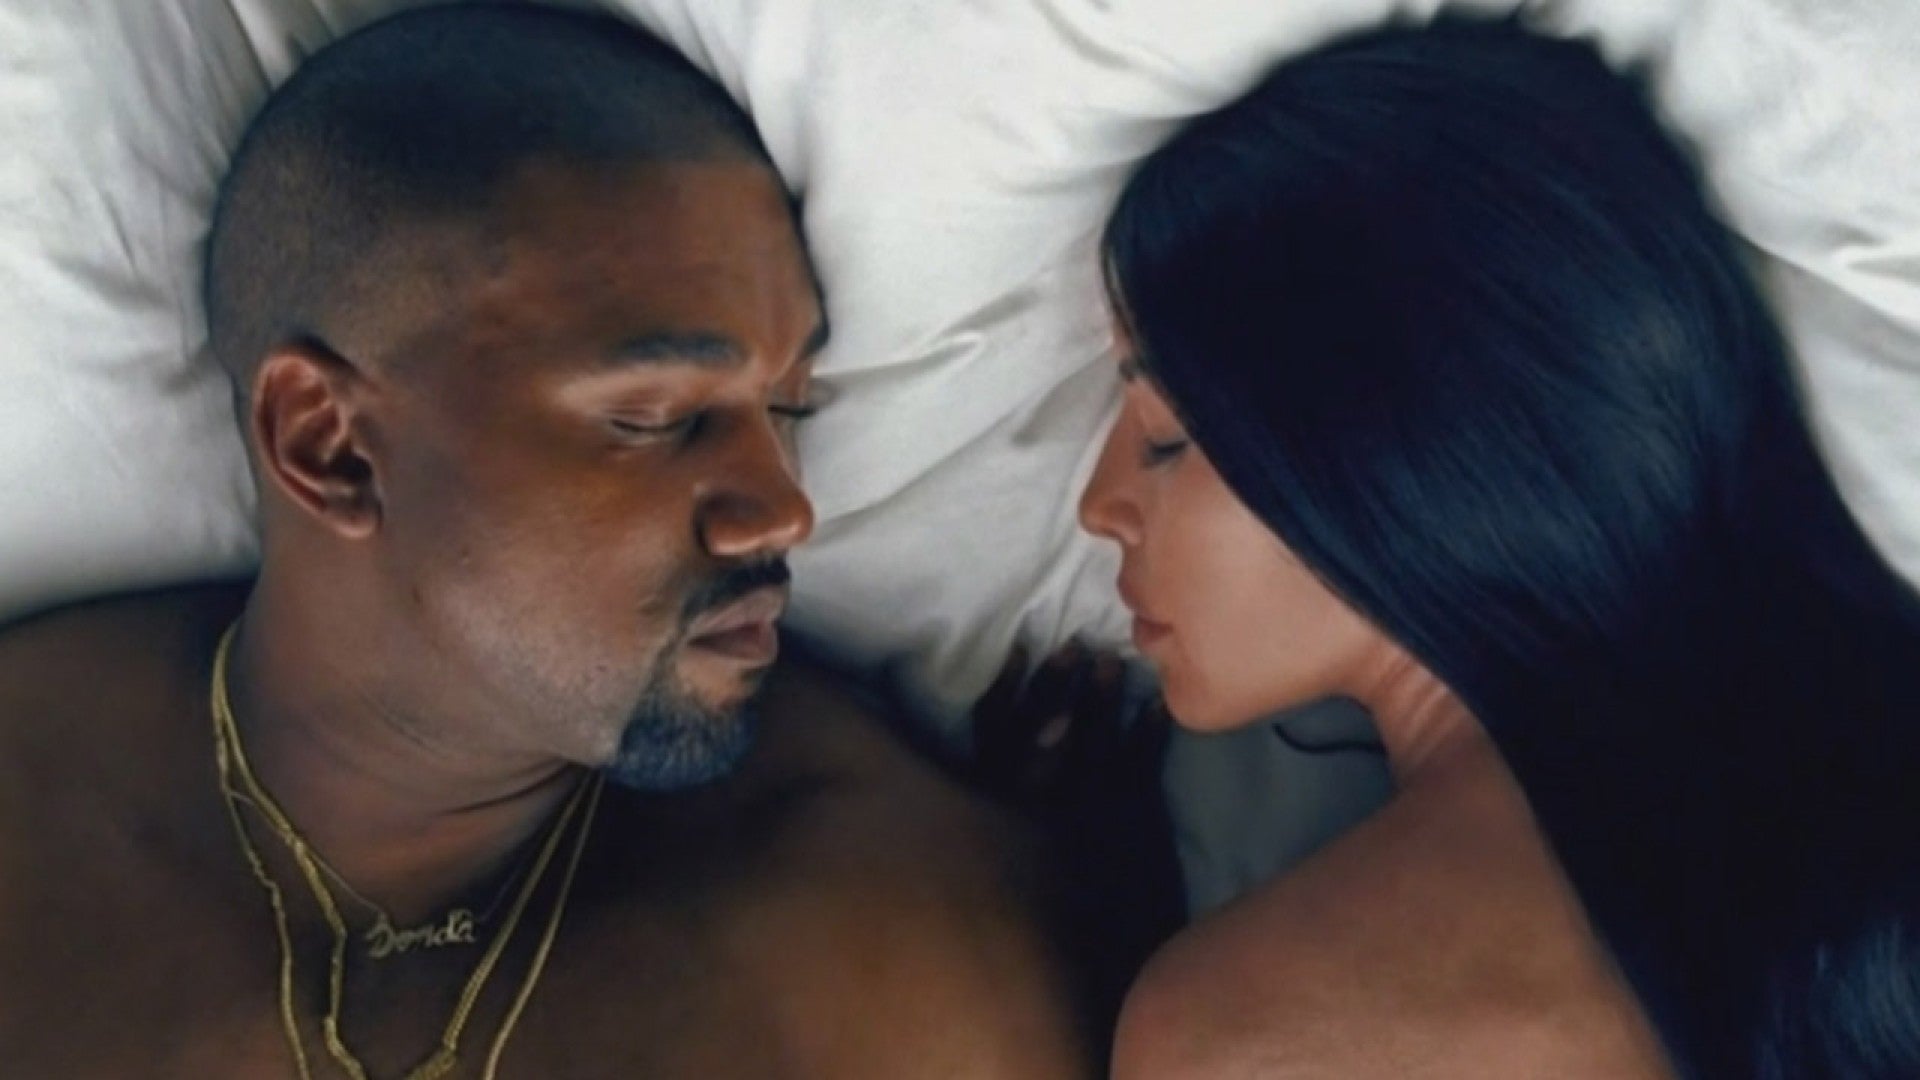 Kanye West Drops NSFW 'Famous' Music Video Featuring 12 Famous Faces Lying  Naked in Bed